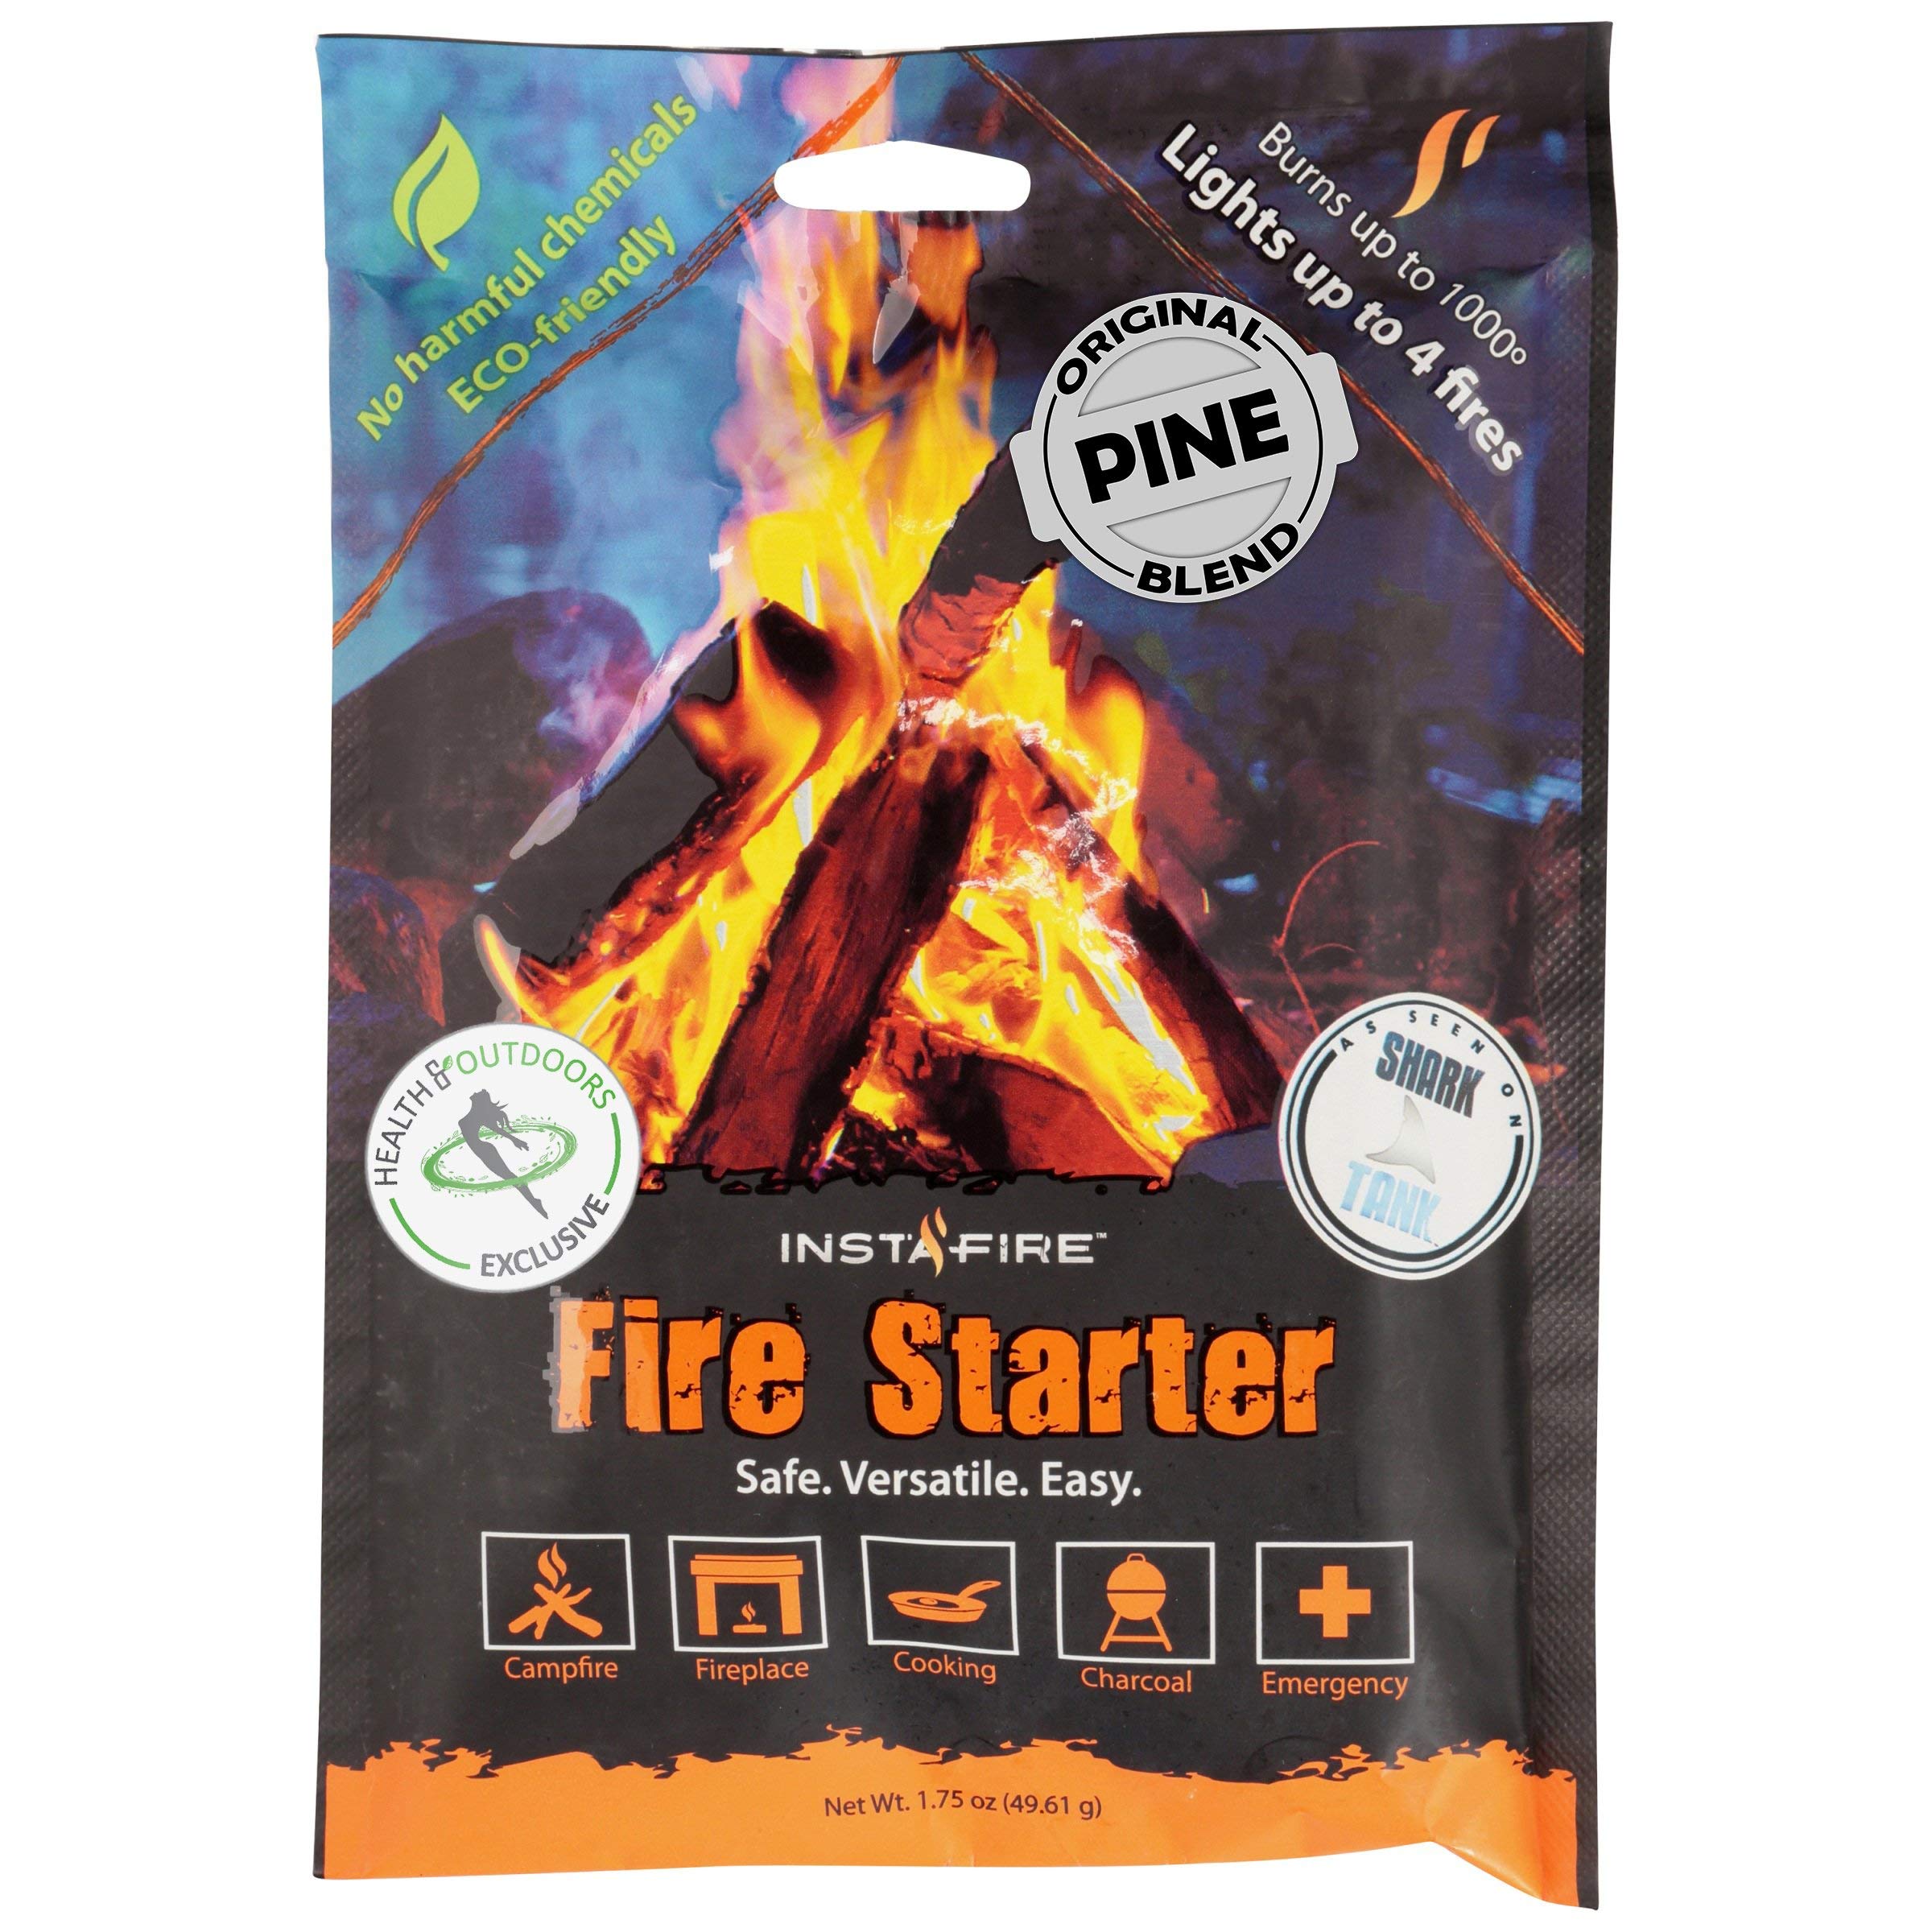 Instafire Insta-Fire Original Blend Granulated Fire Starter, All Natural, Eco-Friendly, Lights Fires in Any Weather 1.75oz Pouches (6 Packs)